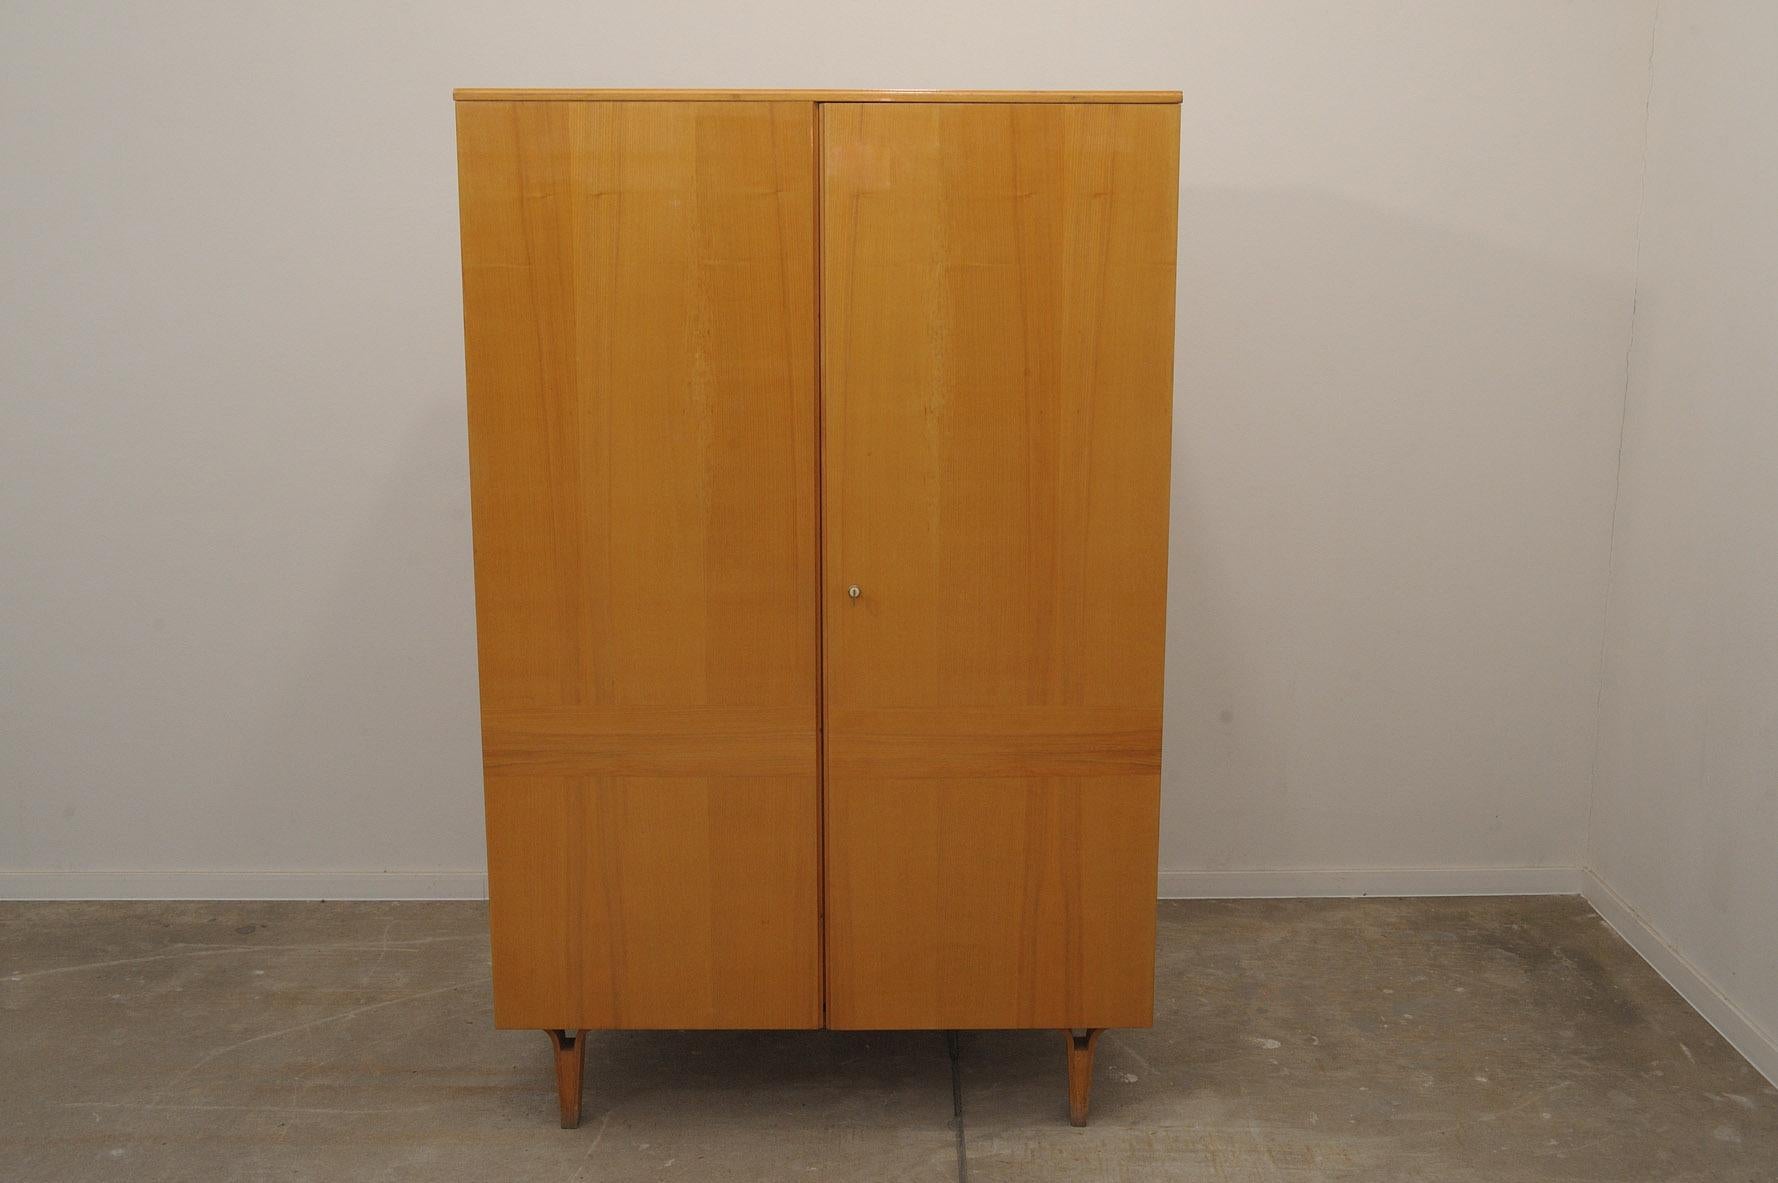 This Elegant vintage wardrobe was made by Nový Domov company in the former Czechoslovakia in the 1970´s. Inside there is one clothes rail and storage space. The inner shelf is missing from the photos, but it´s available. In good Vintage condition,